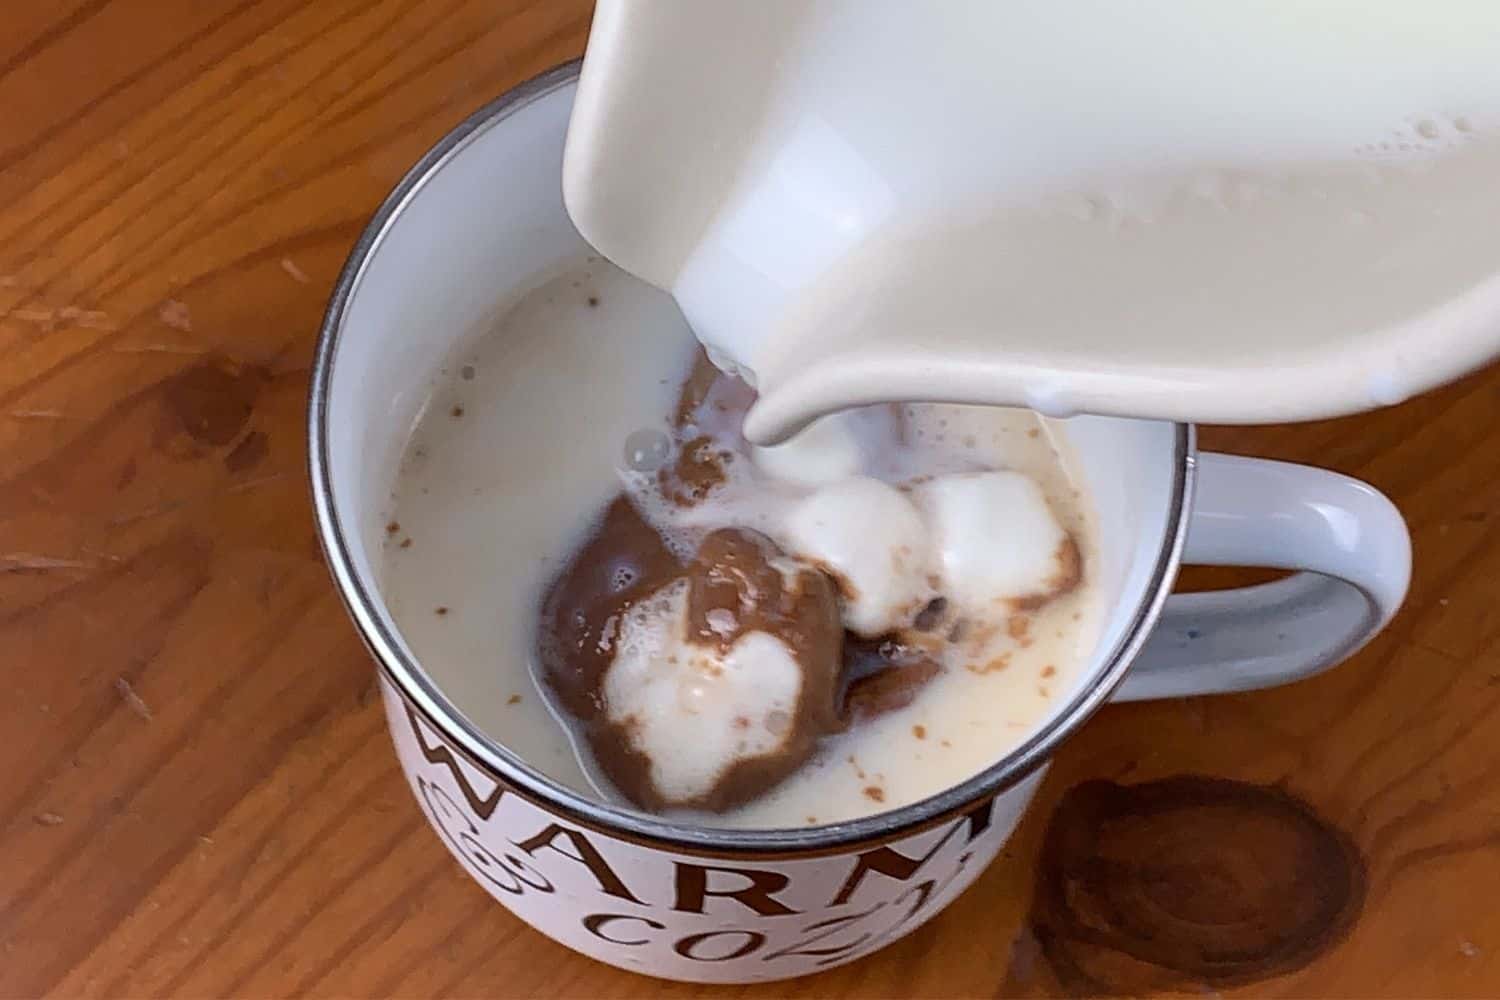 Marshmallows popping out of our DIY hot chocolate bomb